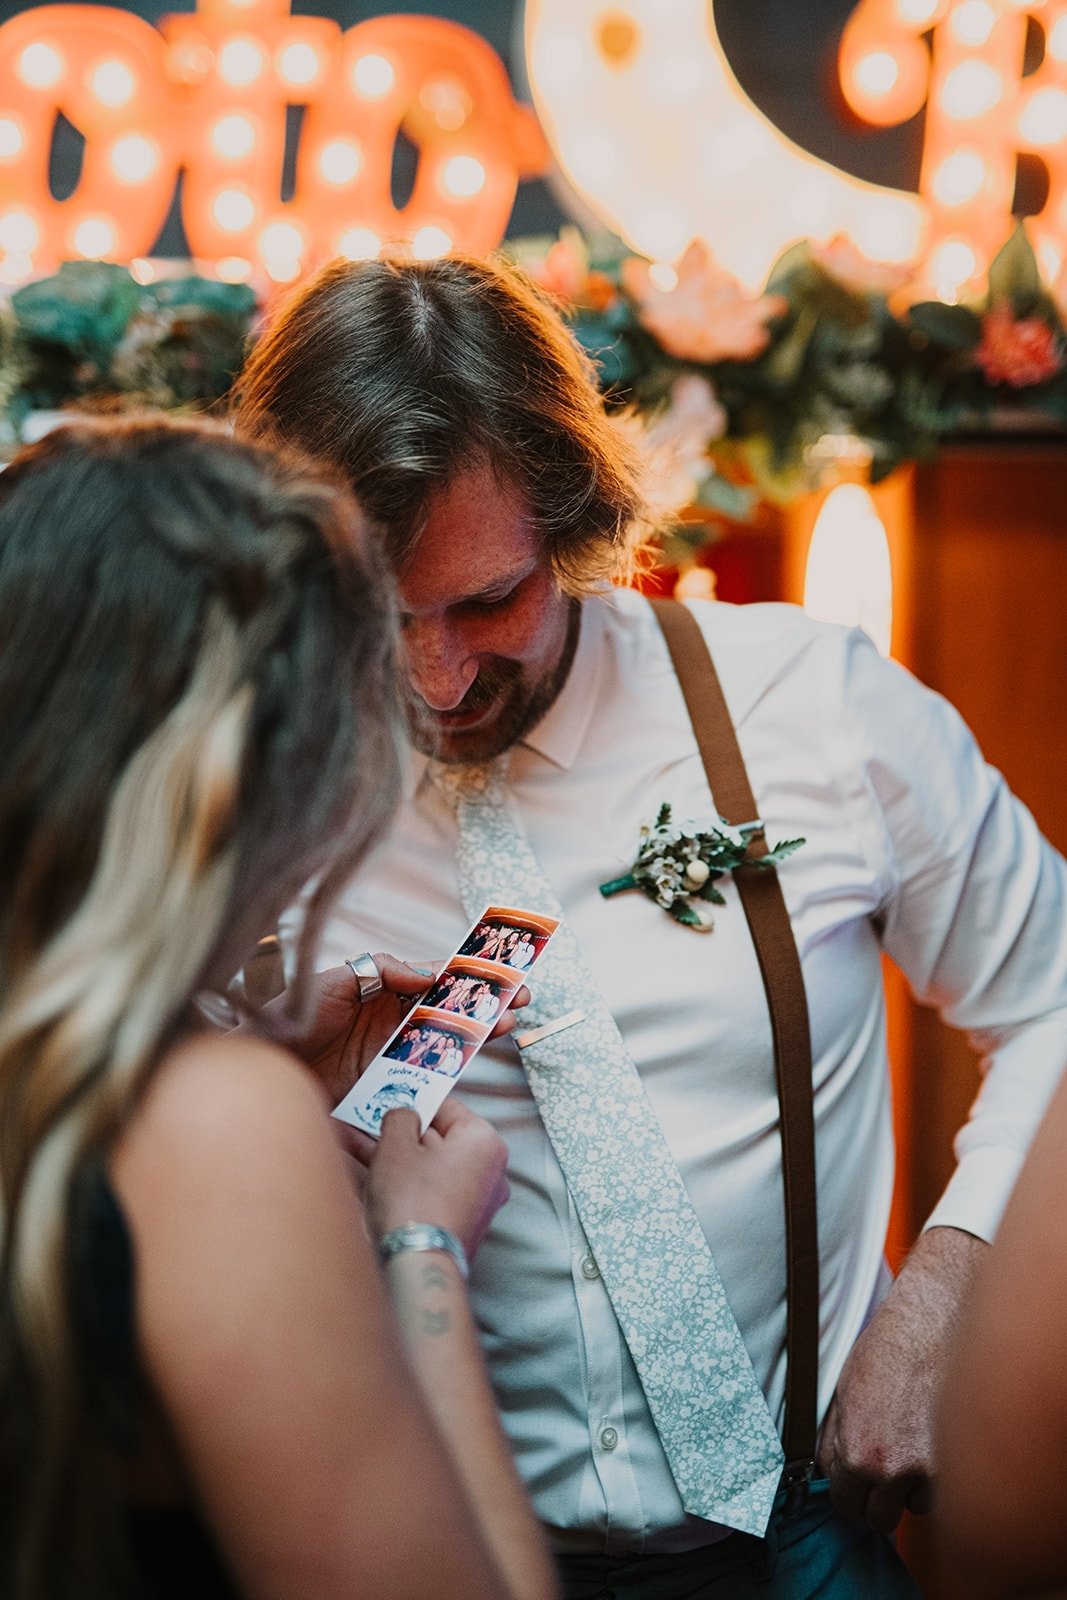 Seeing these beautiful photo prints reminds us of the joy, the laughter, and the love shared on this magical day. Here's to preserving precious moments and turning them into timeless treasures! 💖
.
.
.
#gorgeweddingconcierge #weddingplanning #weddin